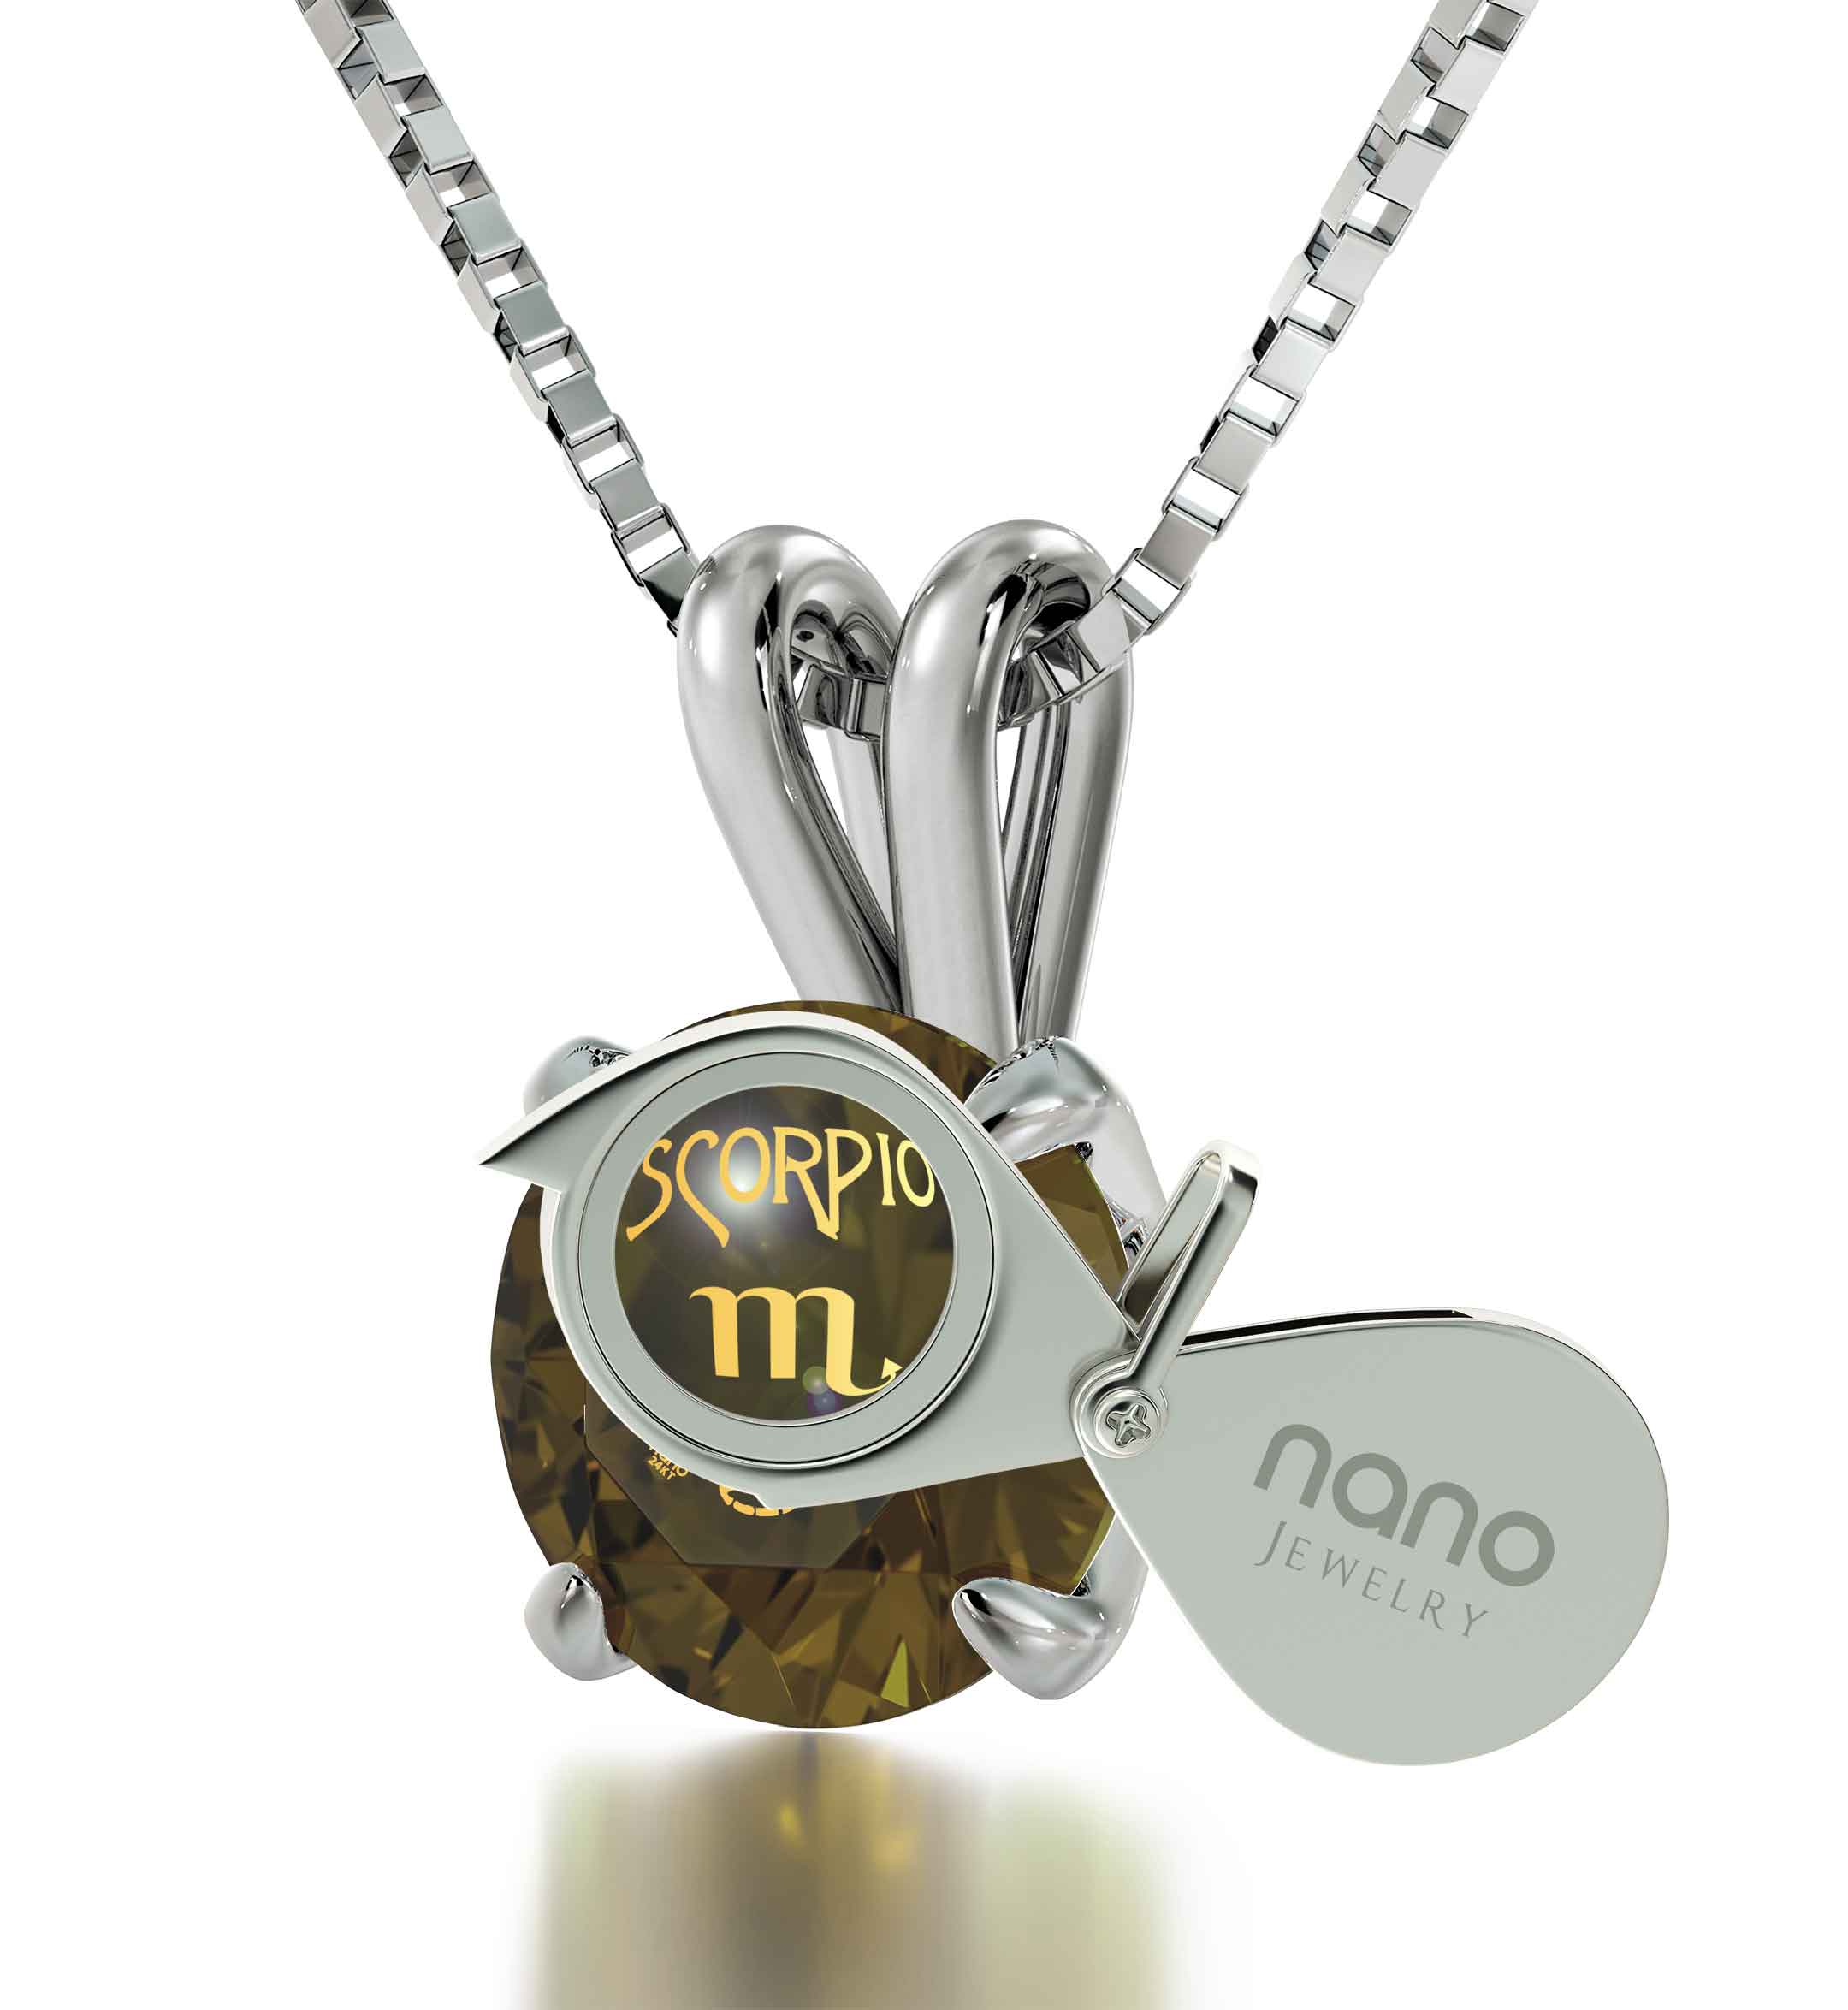 925 Sterling Silver Scorpio Necklace Zodiac Pendant with a Swarovski Crystal, attached to a sterling silver chain, featuring a small tag engraved with 'nano jewelry'.